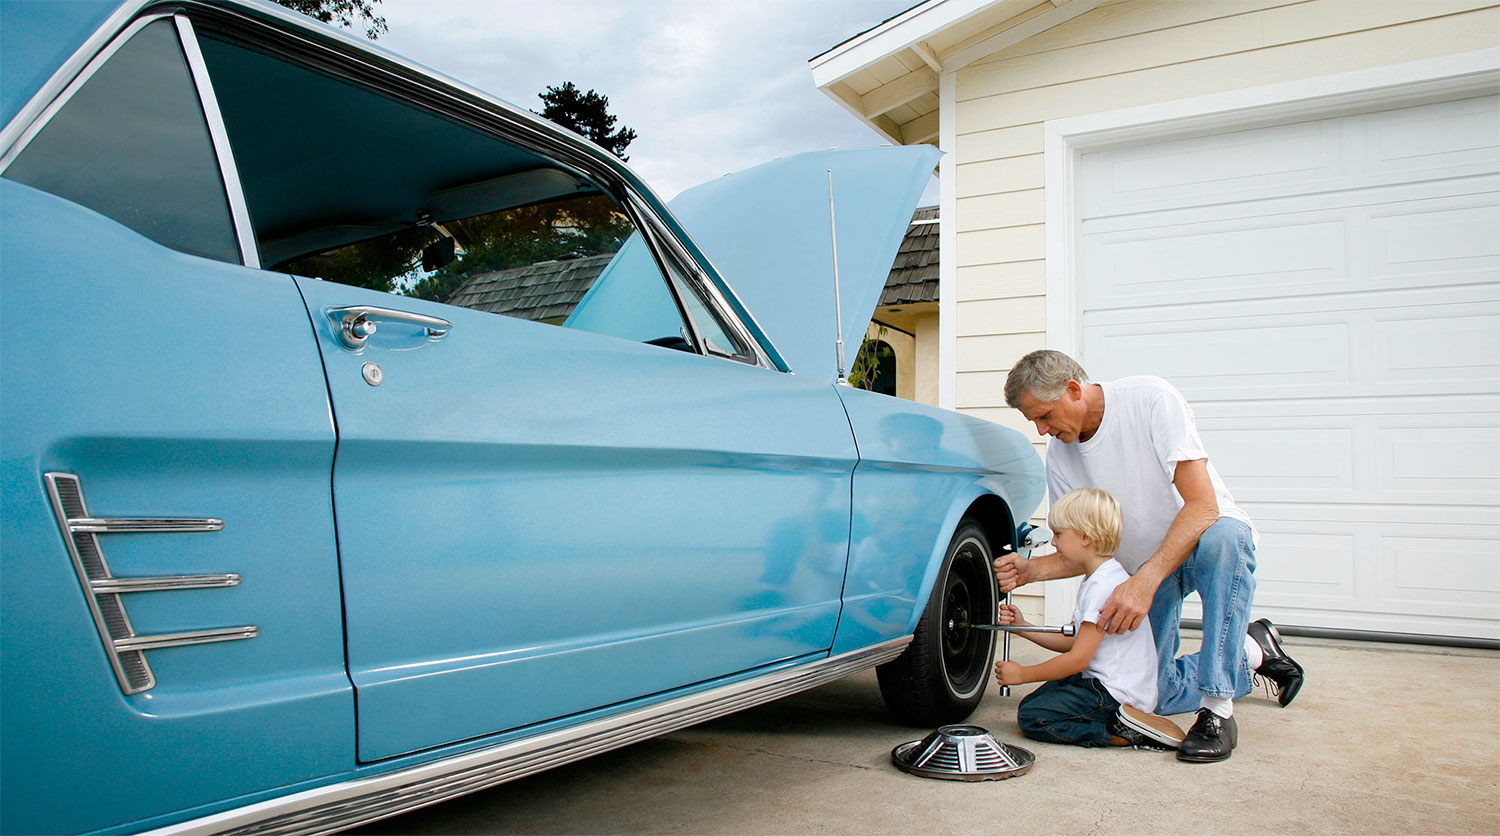 Young boy learning how to change tire with grandpa on classic car